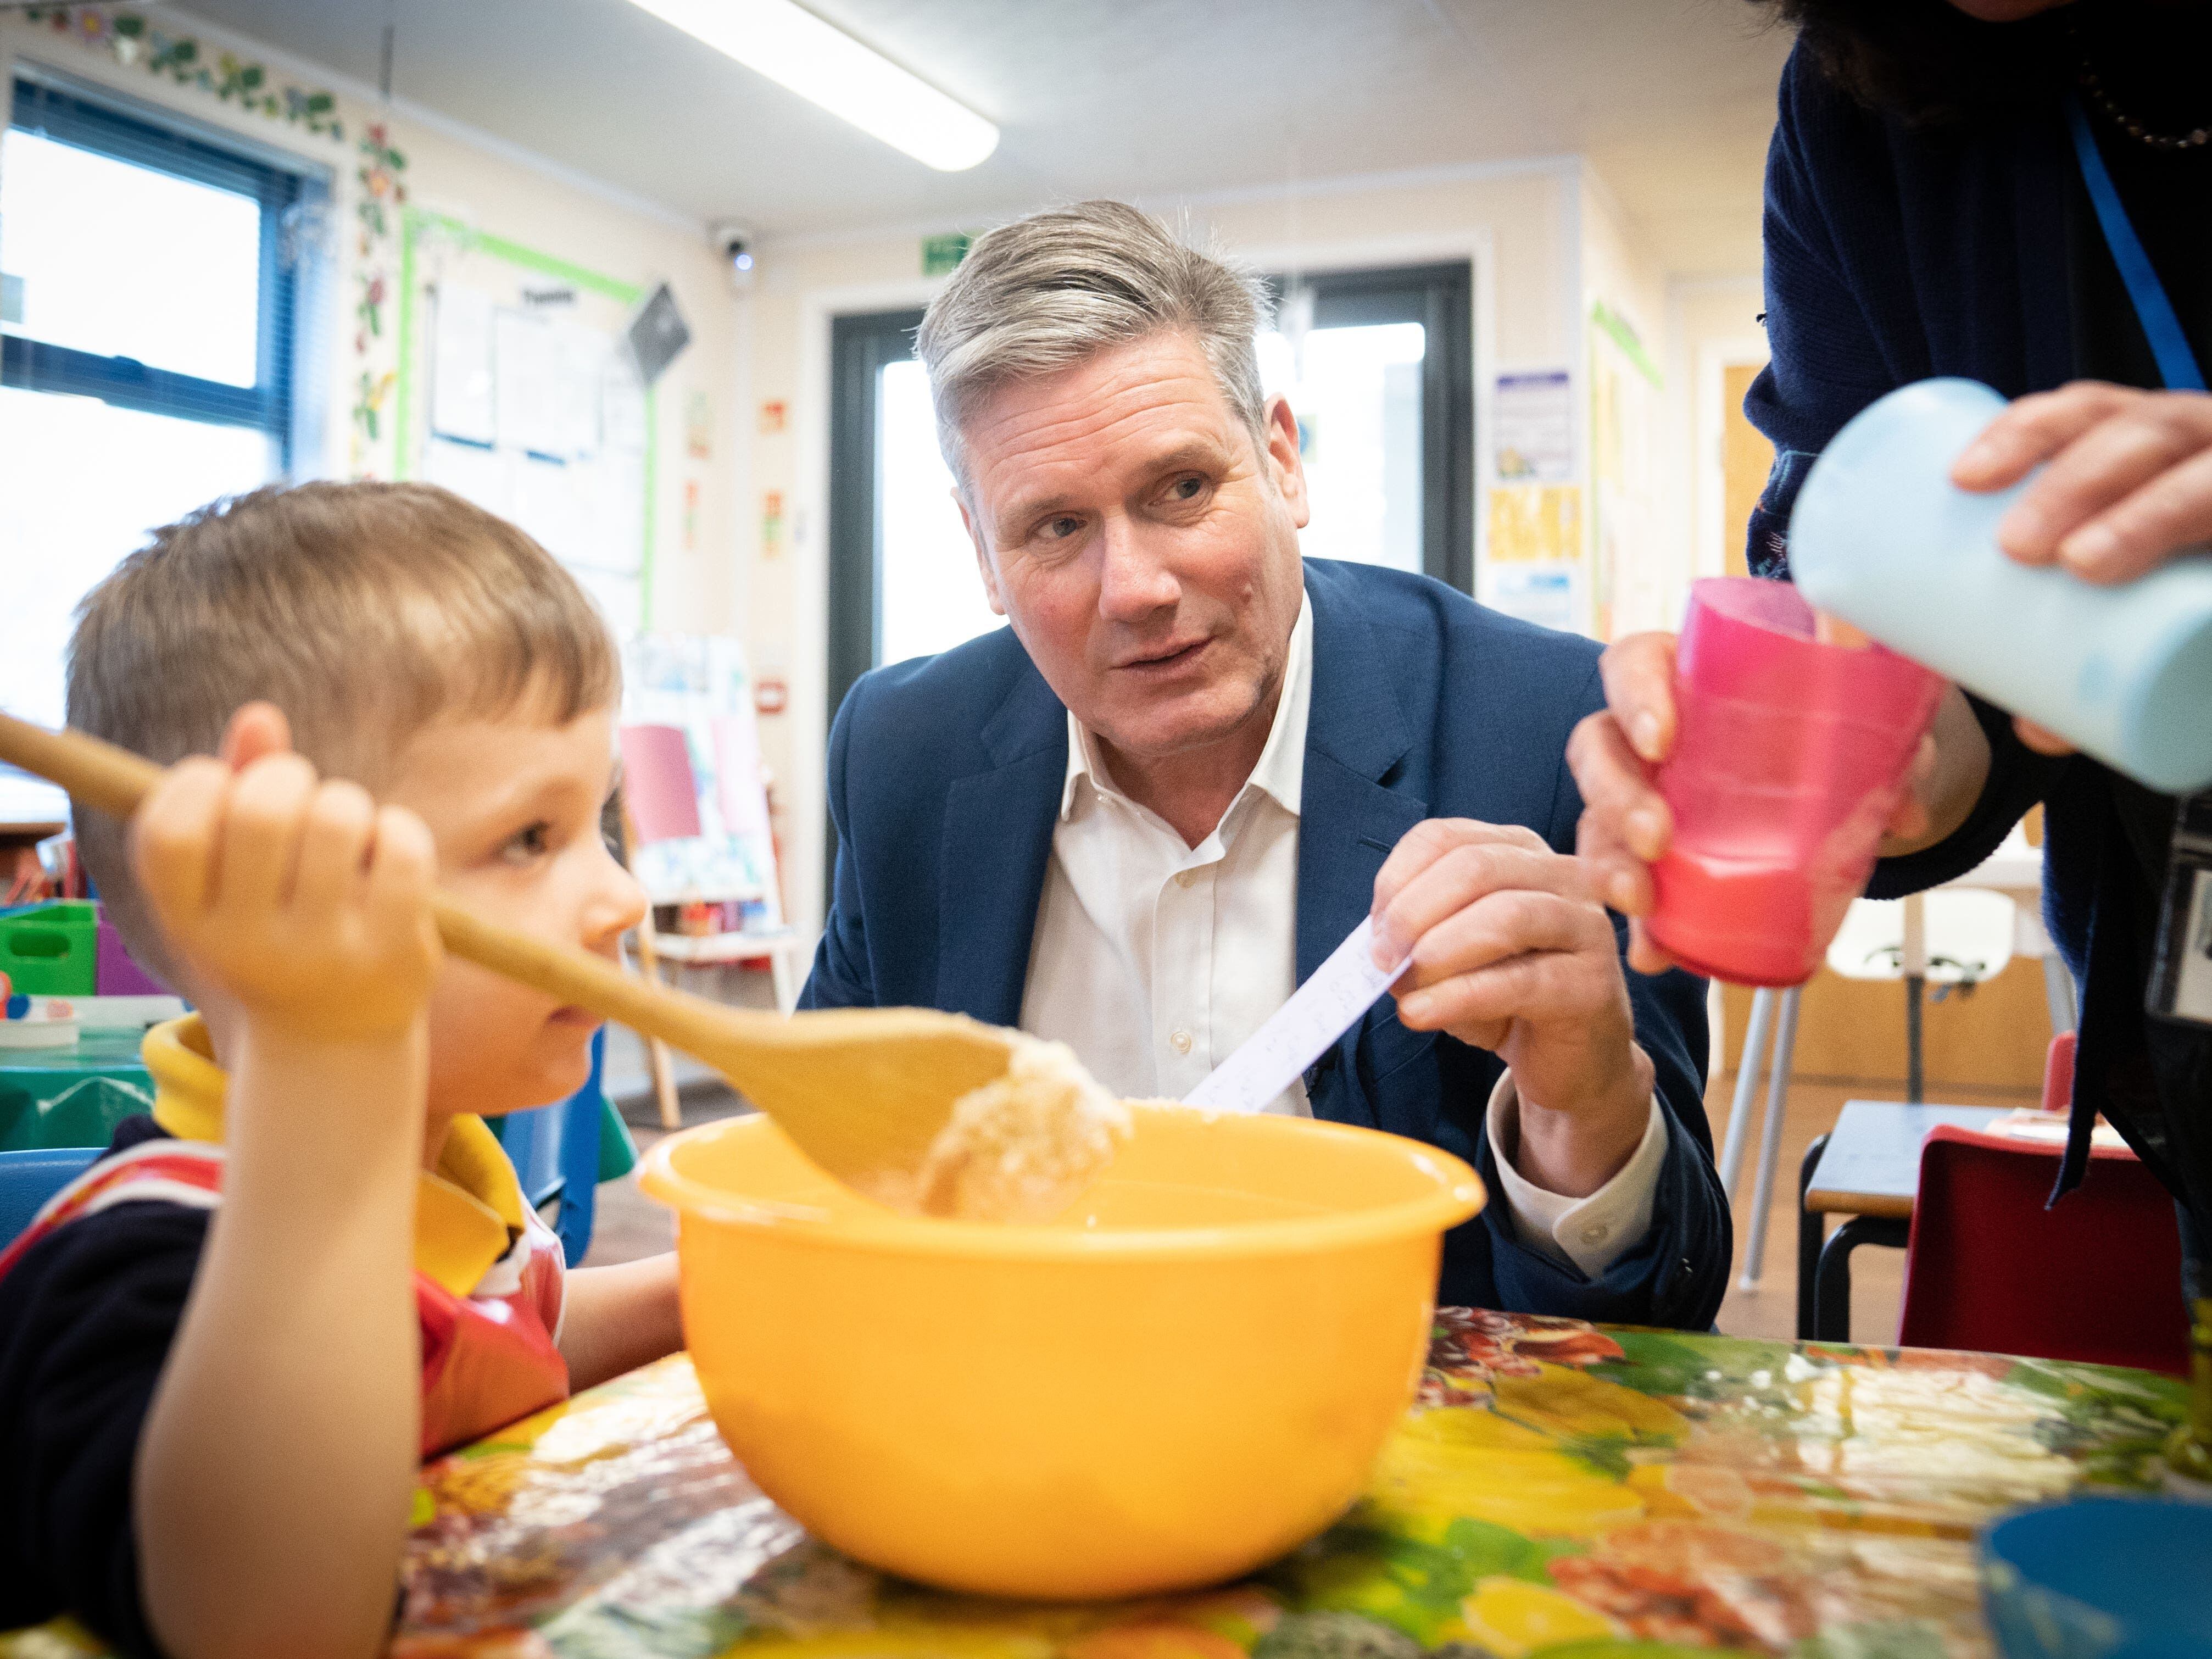 Labour pledges to create 100,000 extra childcare places in schools